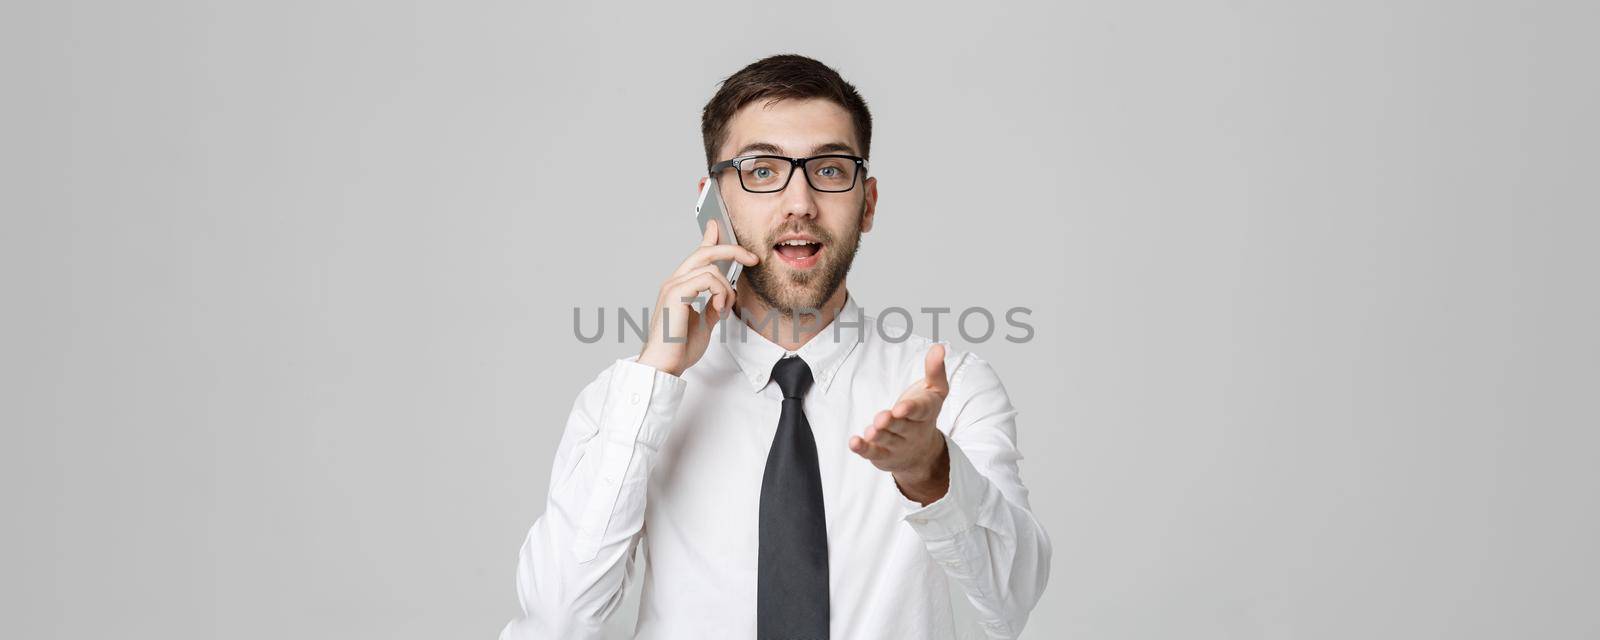 Business Concept - Portrait young handsome angry business man in suit talking on phone looking at camera. White background.